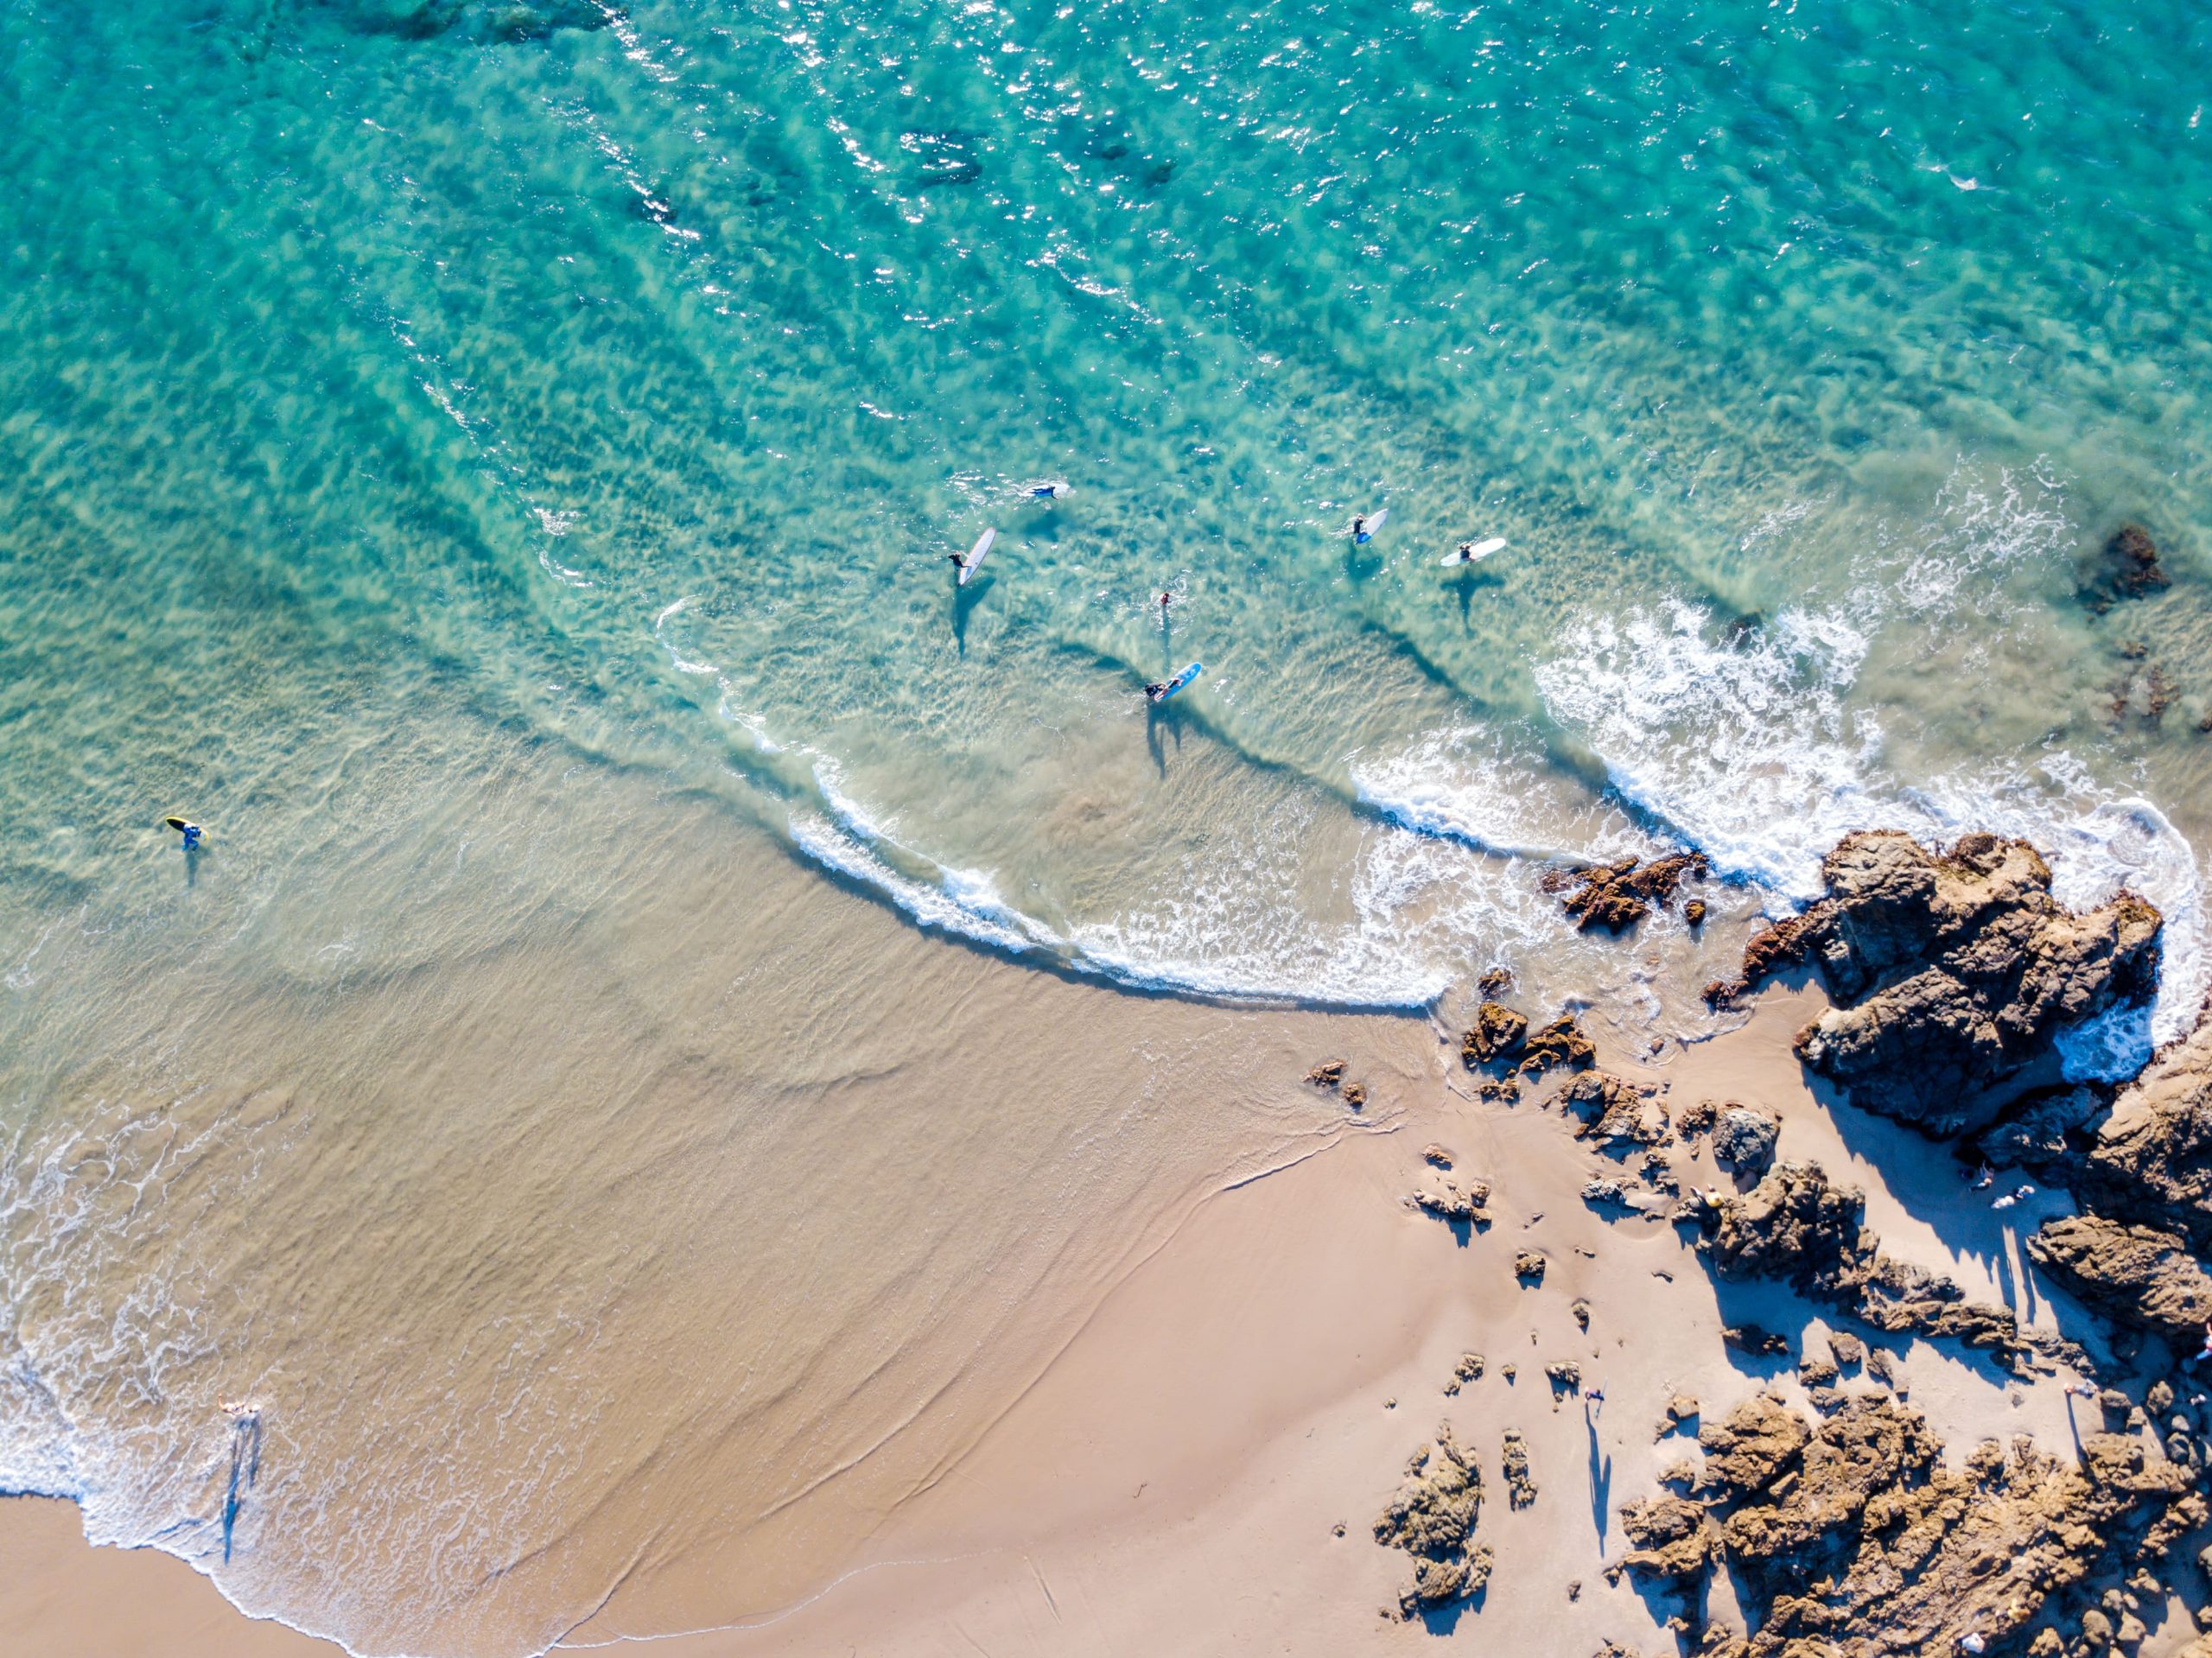 The Ultimate Guide To Byron Bay, Australia